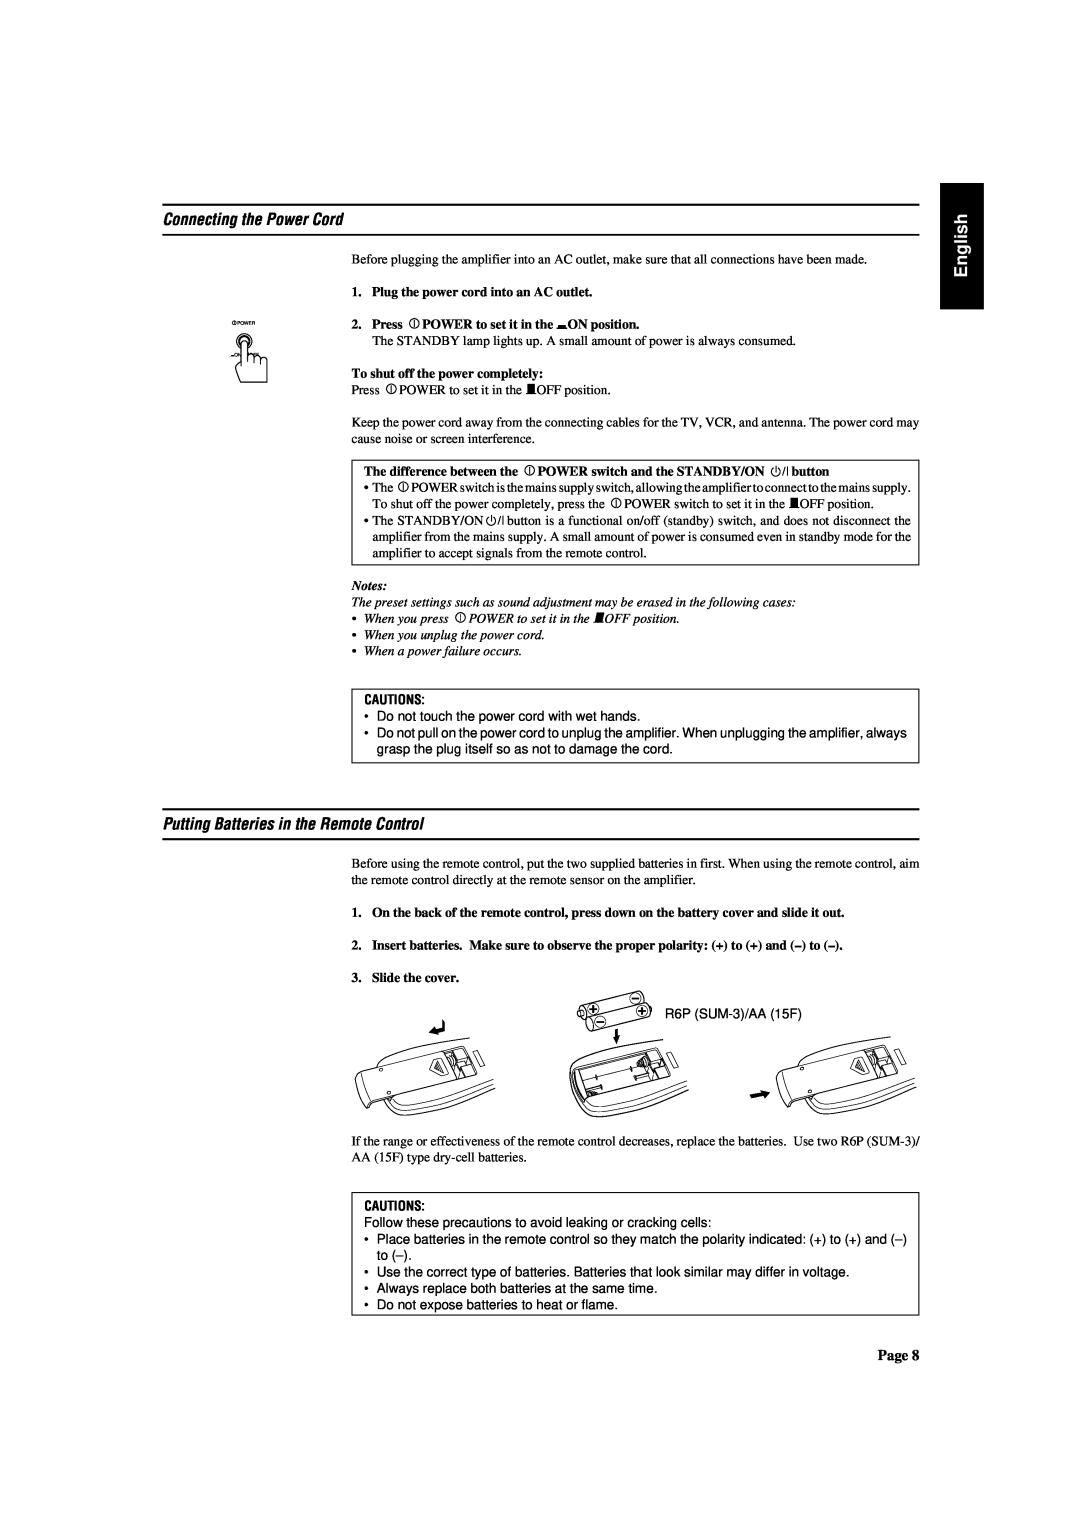 JVC AX-V5BK manual Connecting the Power Cord, Putting Batteries in the Remote Control, English, Cautions 